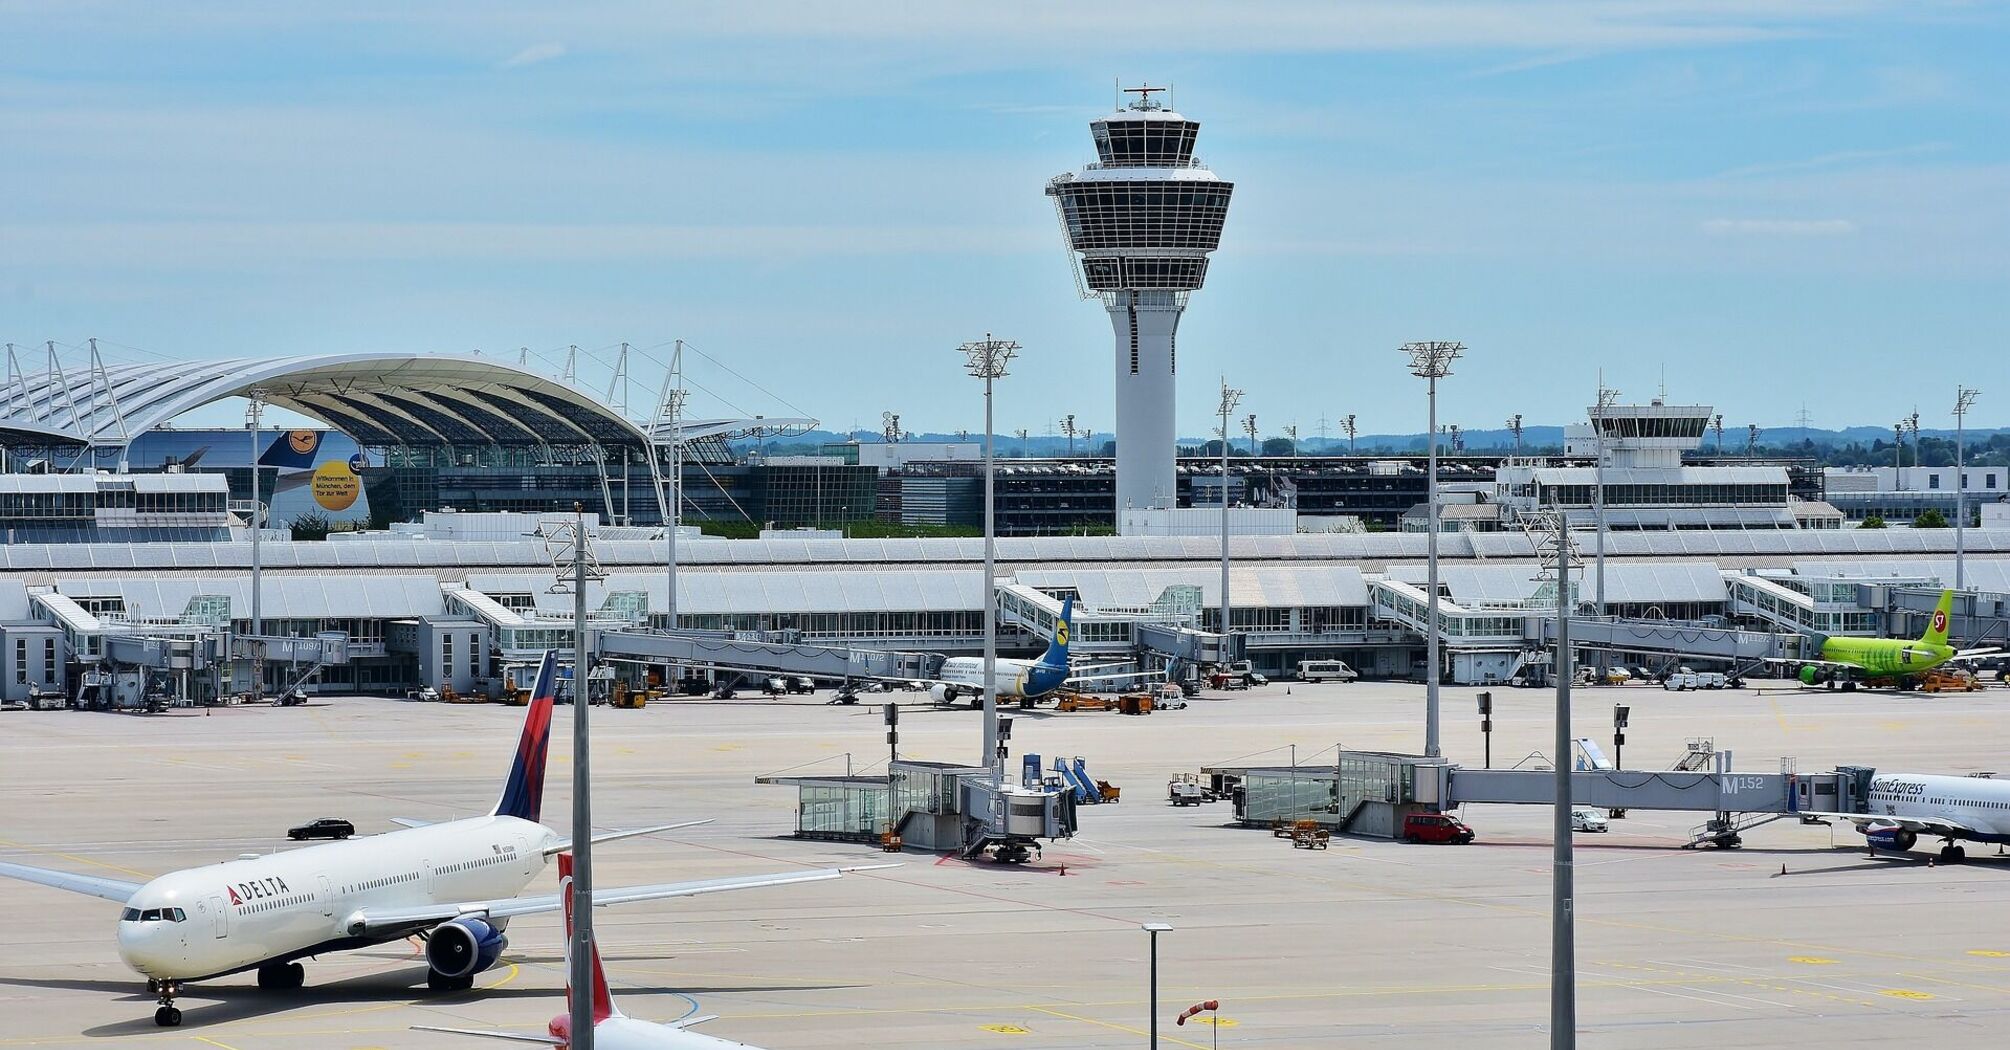 Munich Airport with planes on the tarmac and control tower in the background